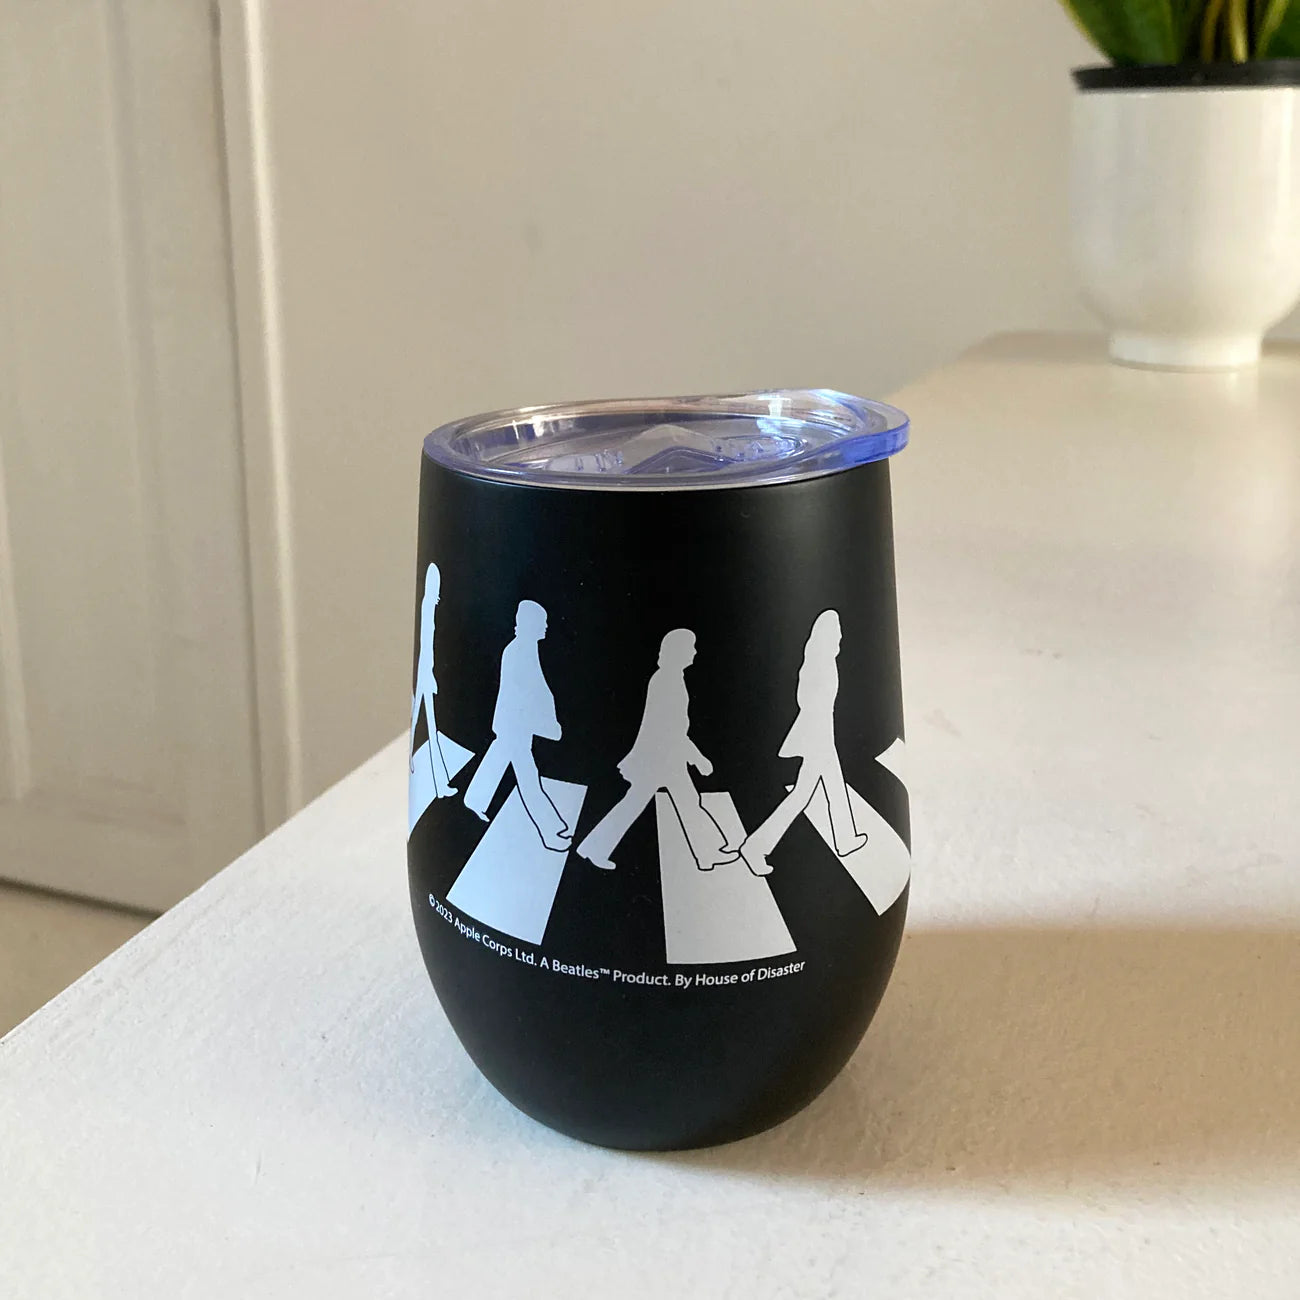 The Beatles - The Beatles Abbey Road Keep Cup